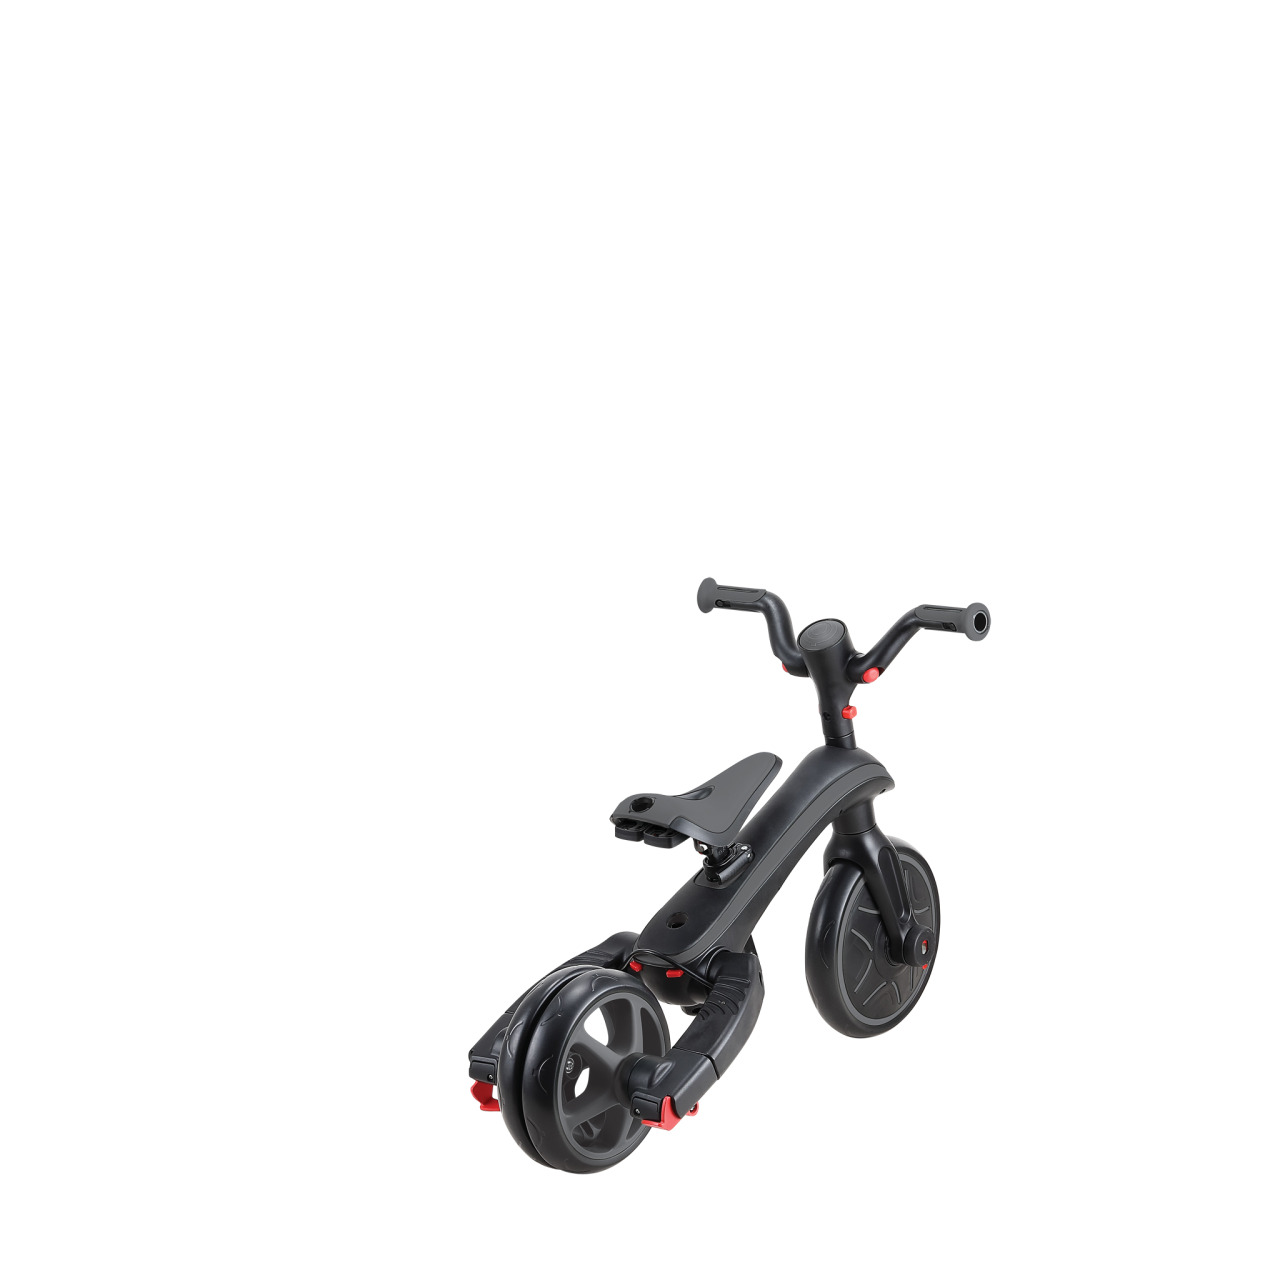 732 120 4 In 1 Tricycle With Smart Pedal Storage